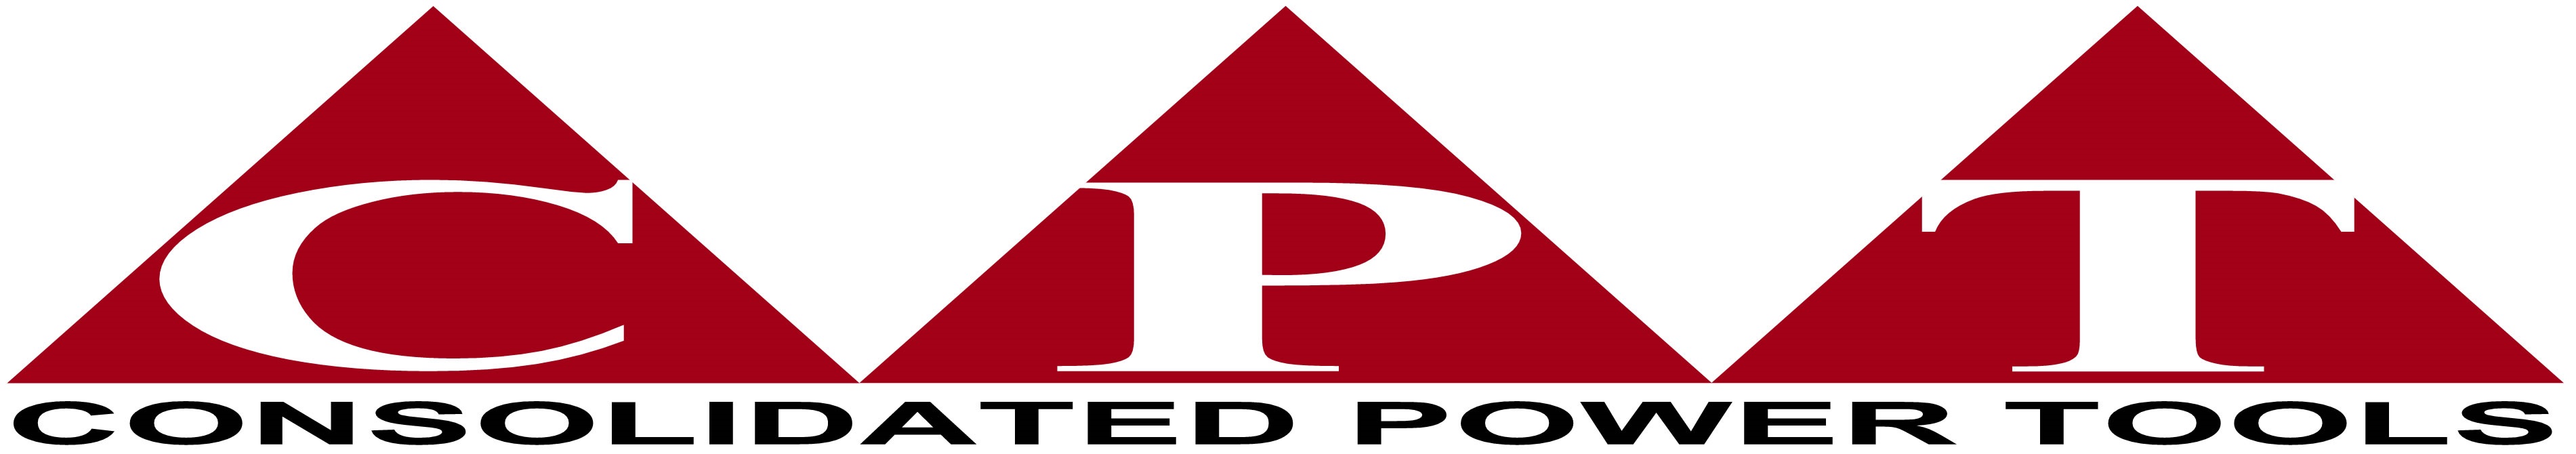 Consolidated Power Tools Ltd Logo